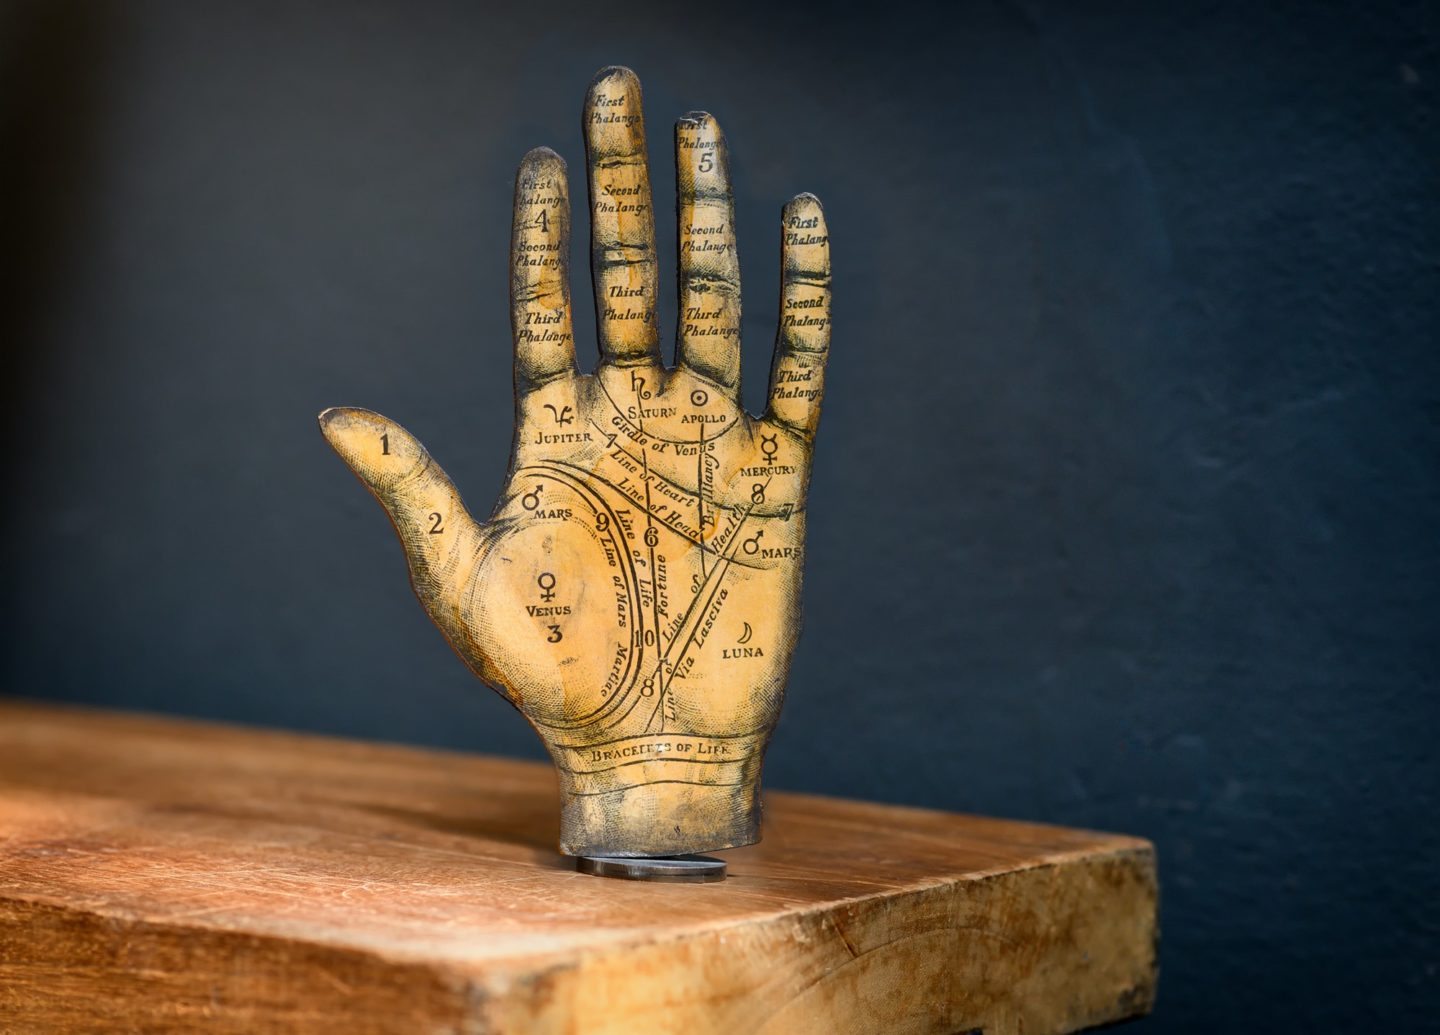 Old Tarot hand showing the zones of the palm